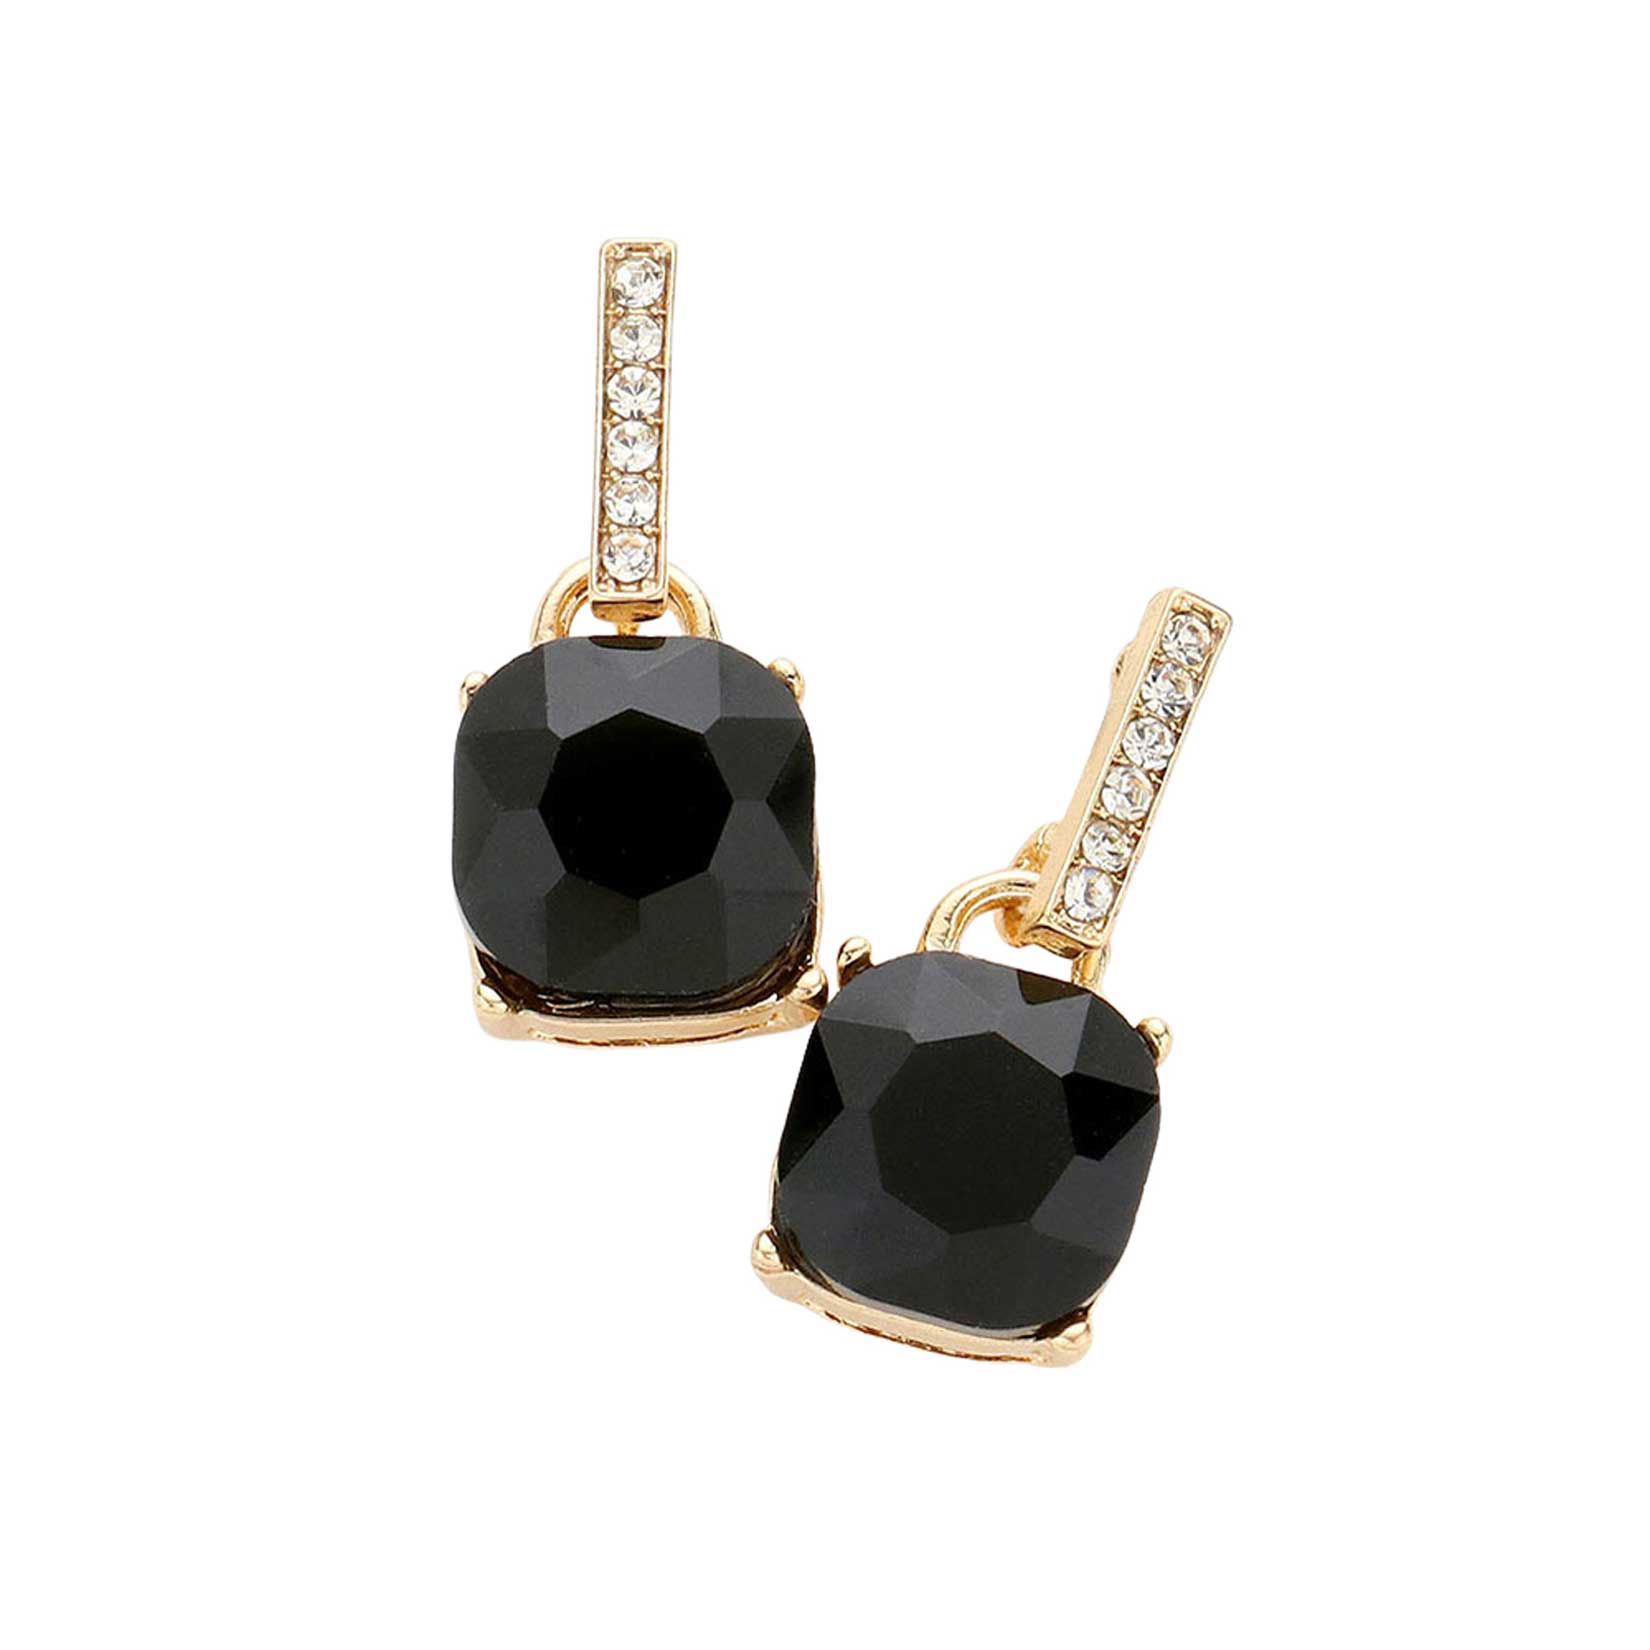 Jet Black Cushion Square Stone Dangle Evening Earrings, Beautifully crafted design adds a gorgeous glow to your special outfit. Cushion square stone jewelry that fits your lifestyle on special occasions! Cushion Square Stone and sparkling glow give these stunning earrings an elegant look and make you stand out. Perfect Birthday Gift, Anniversary Gift, Mother's Day Gift, Graduation Gift, Prom Jewelry, Just Because Gift, Thank you Gift, or any other special occasion.